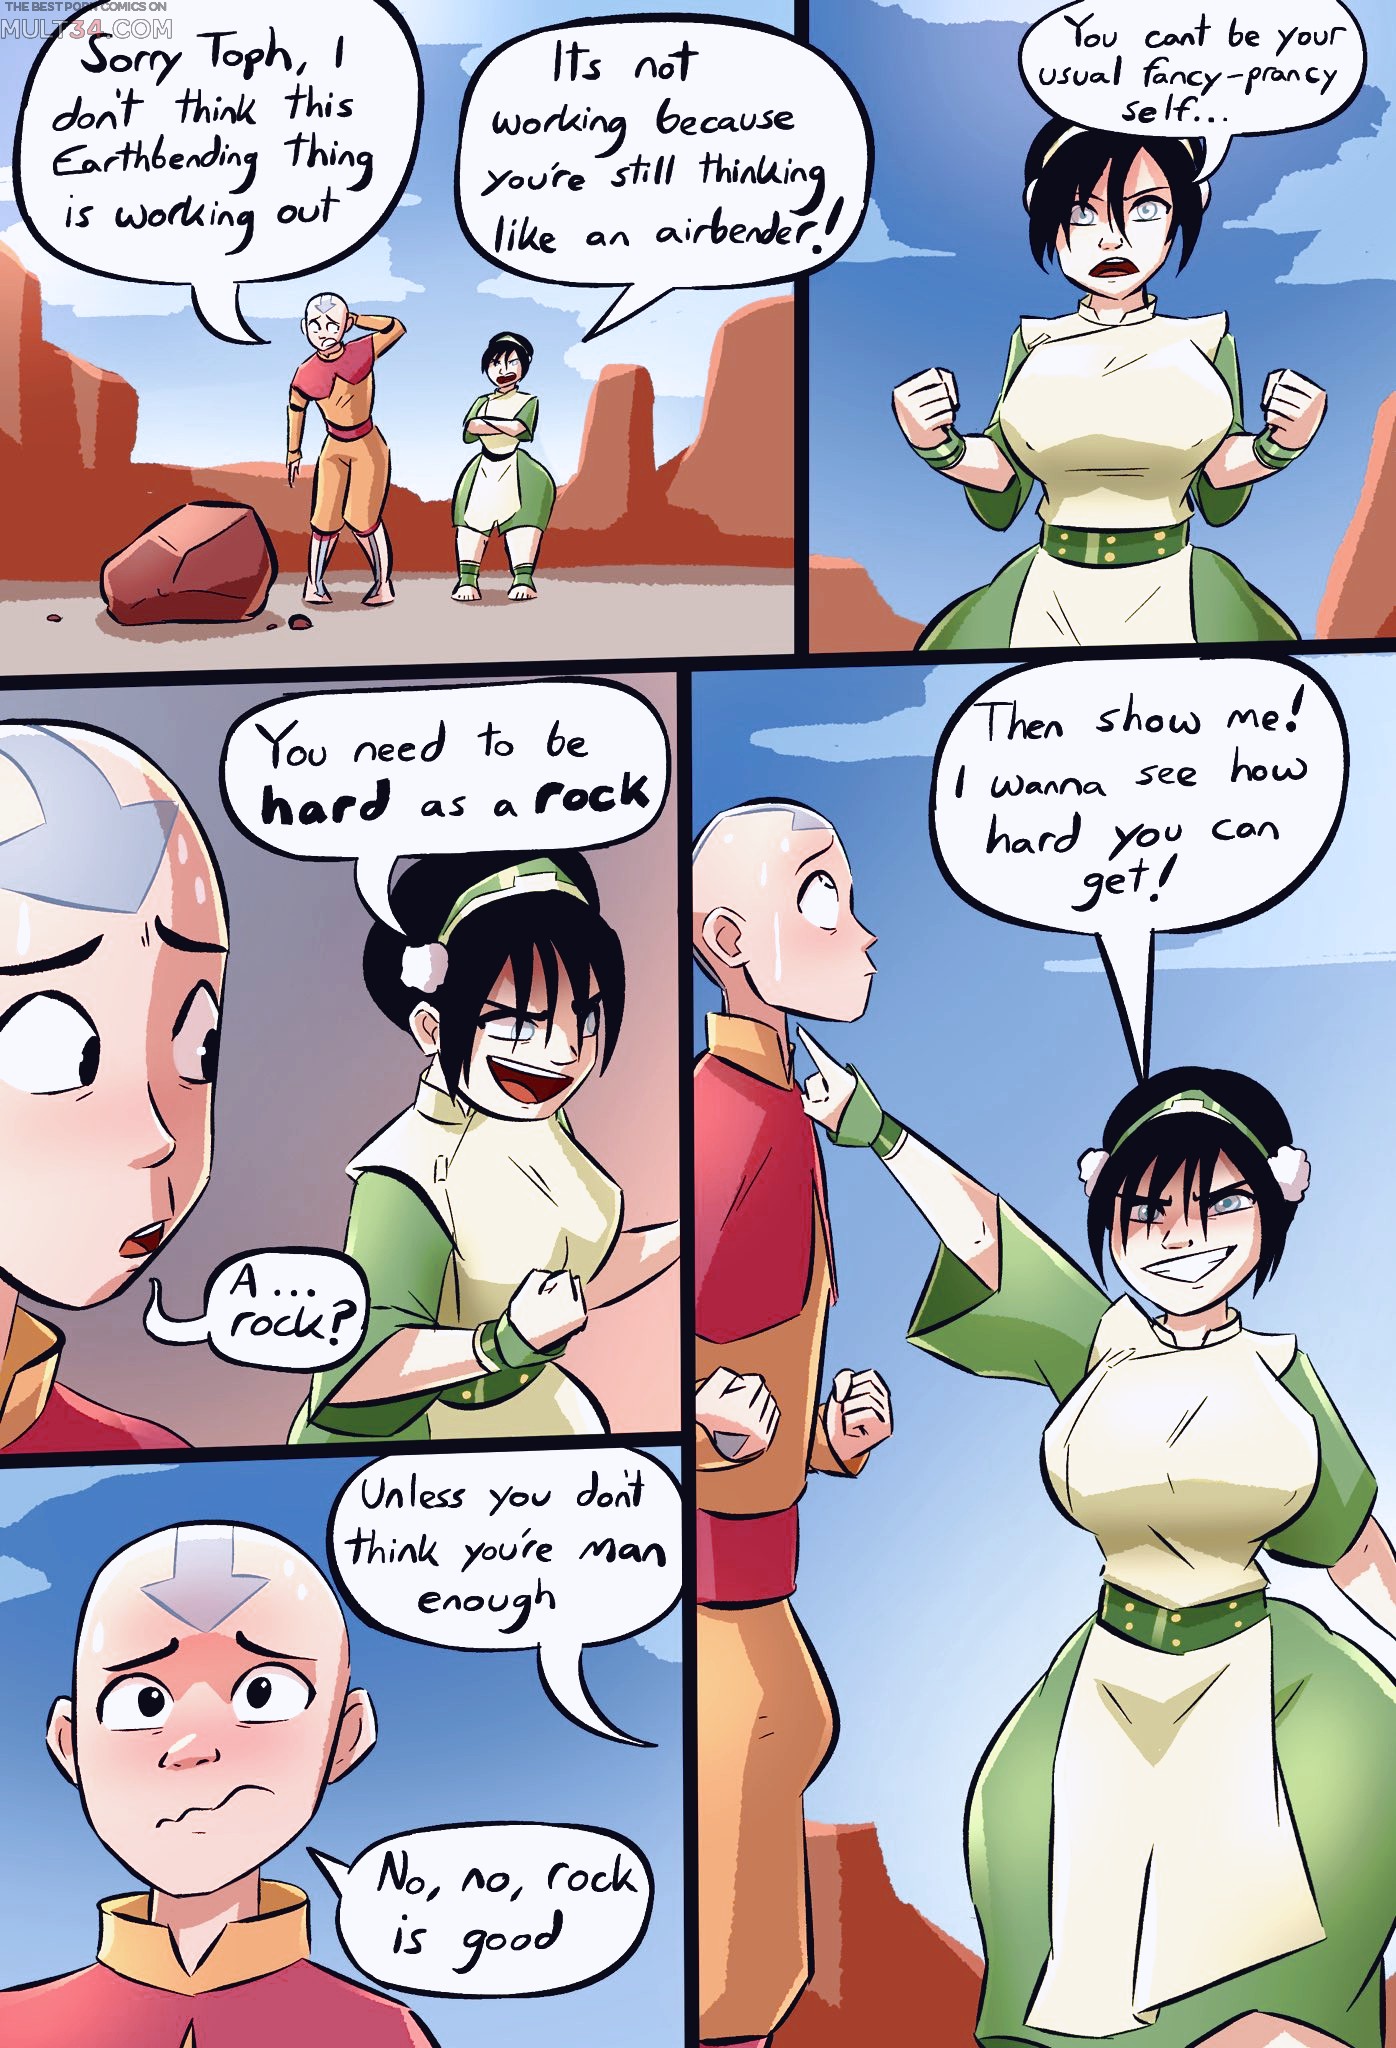 Thic Toph porn comic page 1 on category Avatar: The Last Airbender